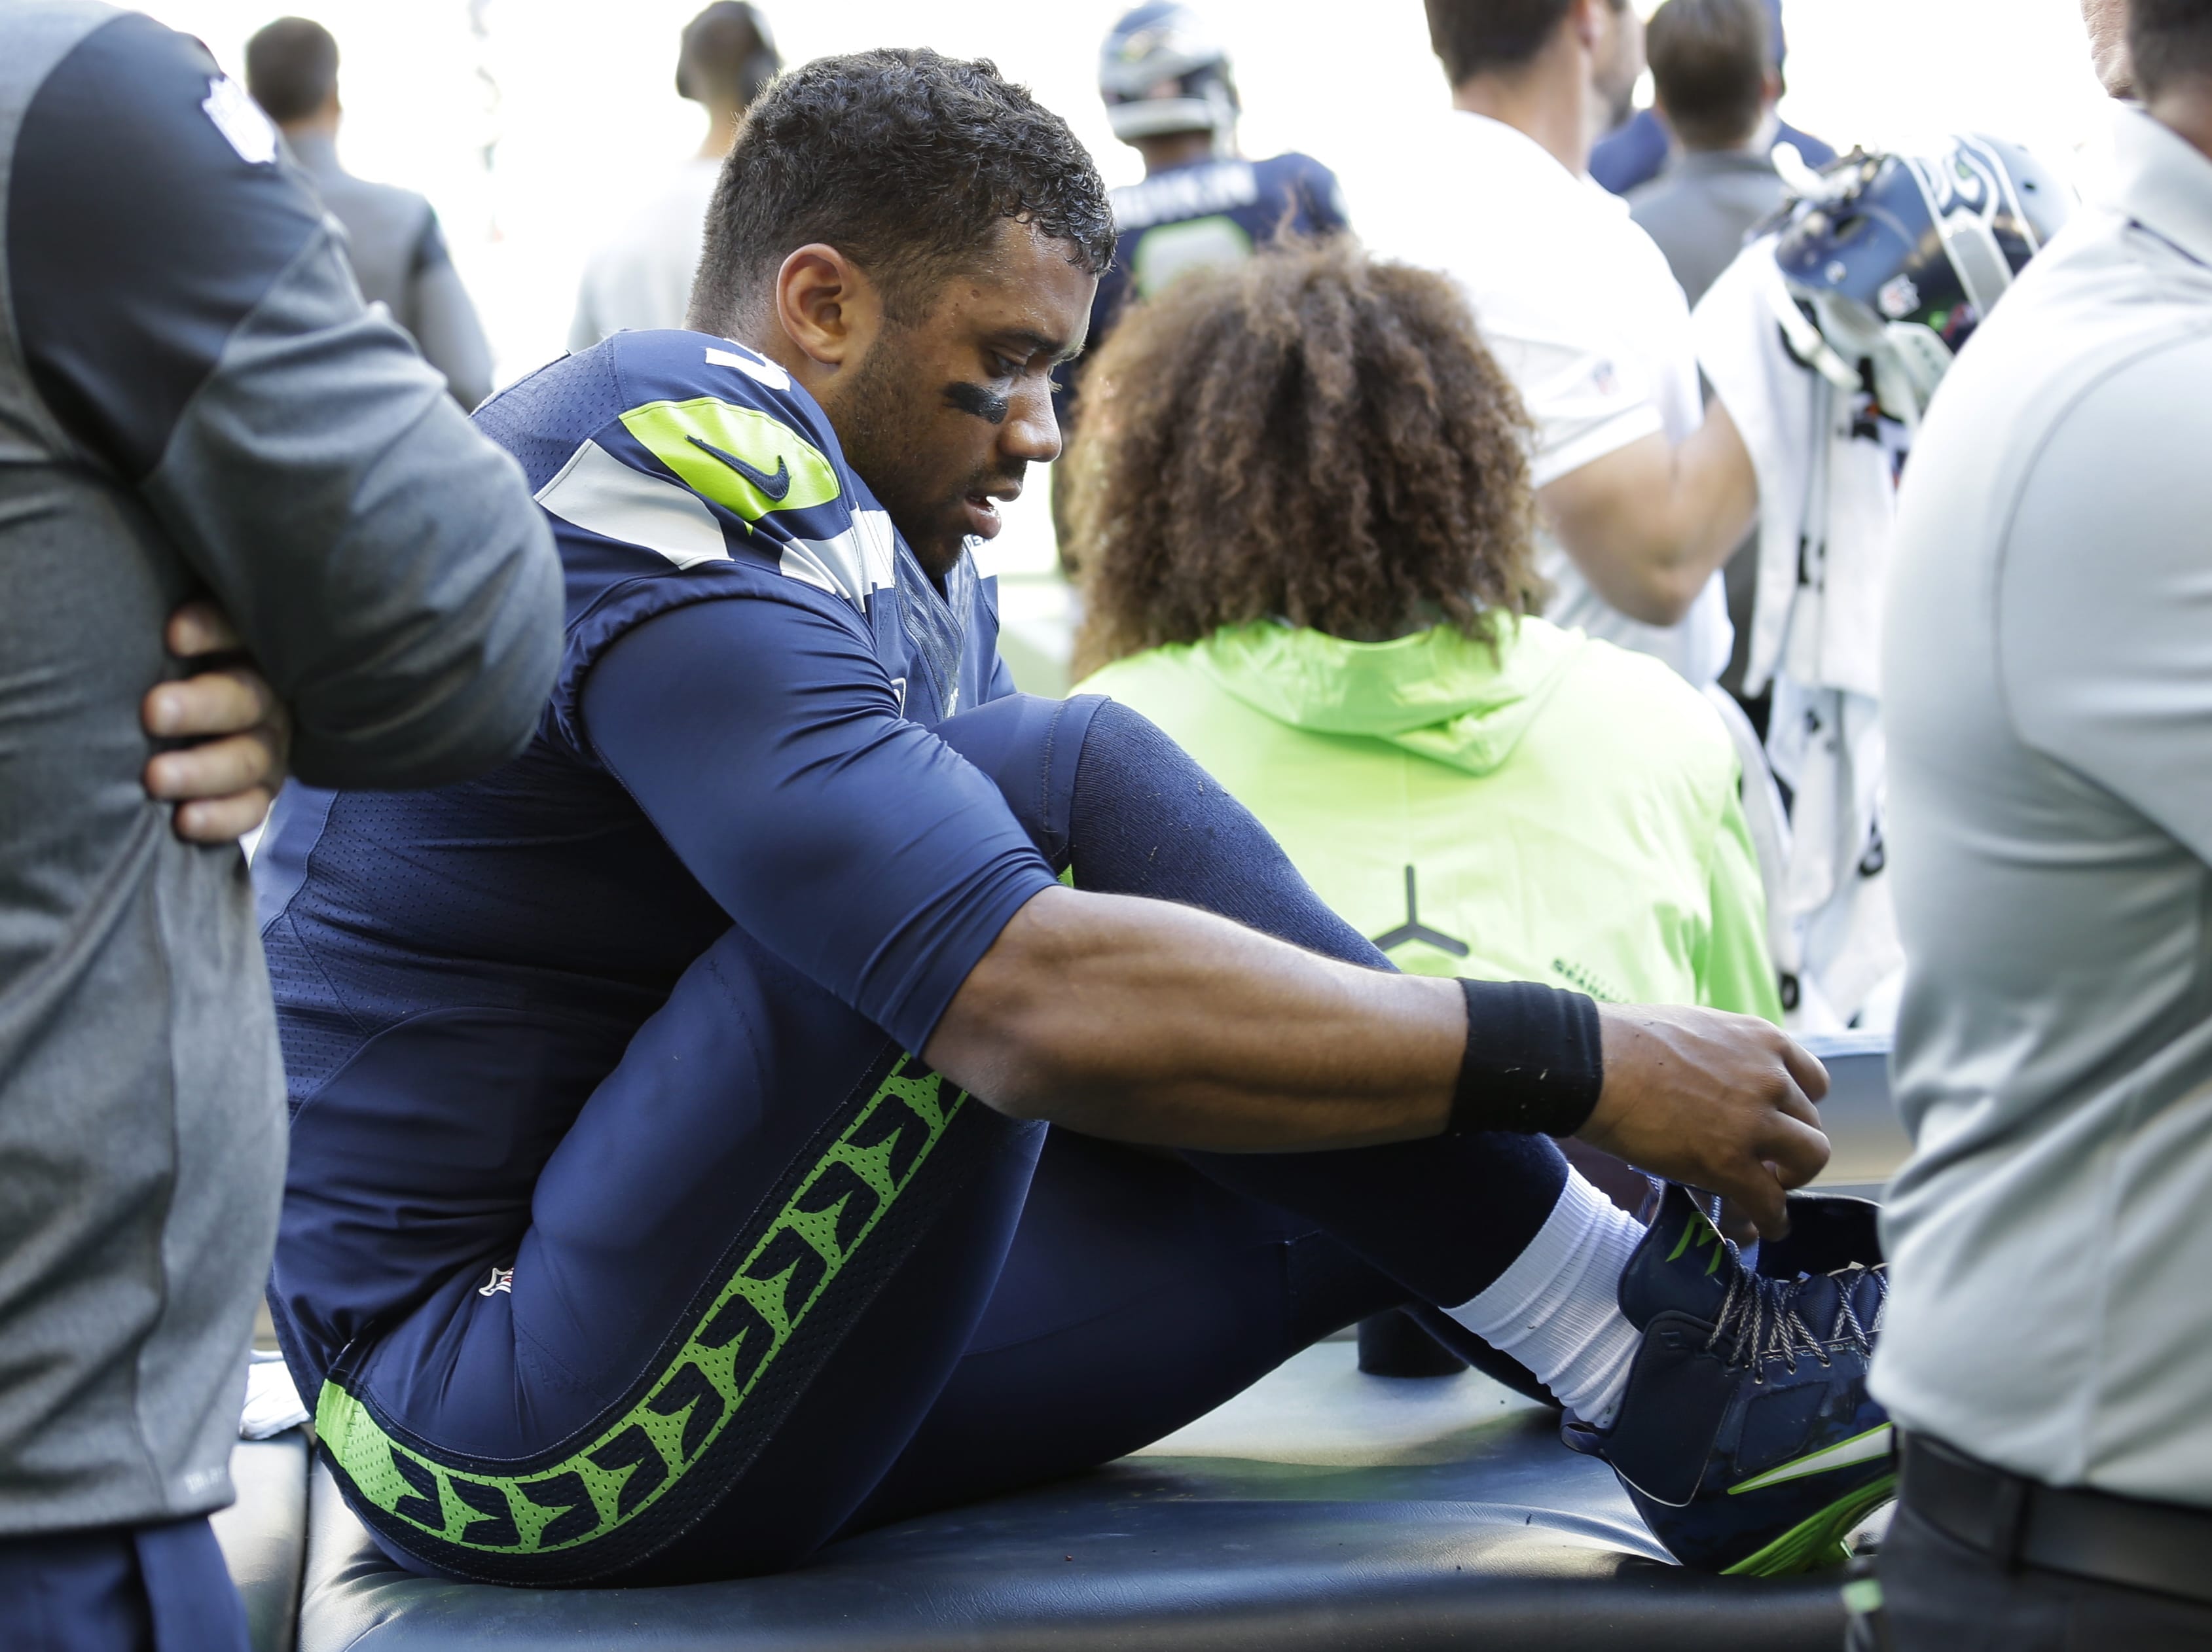 Seattle Seahawks quarterback Russell Wilson laces his shoe after getting his ankle taped following a play during the second half of an NFL football game against the Miami Dolphins, Sunday, Sept. 11, 2016, in Seattle.